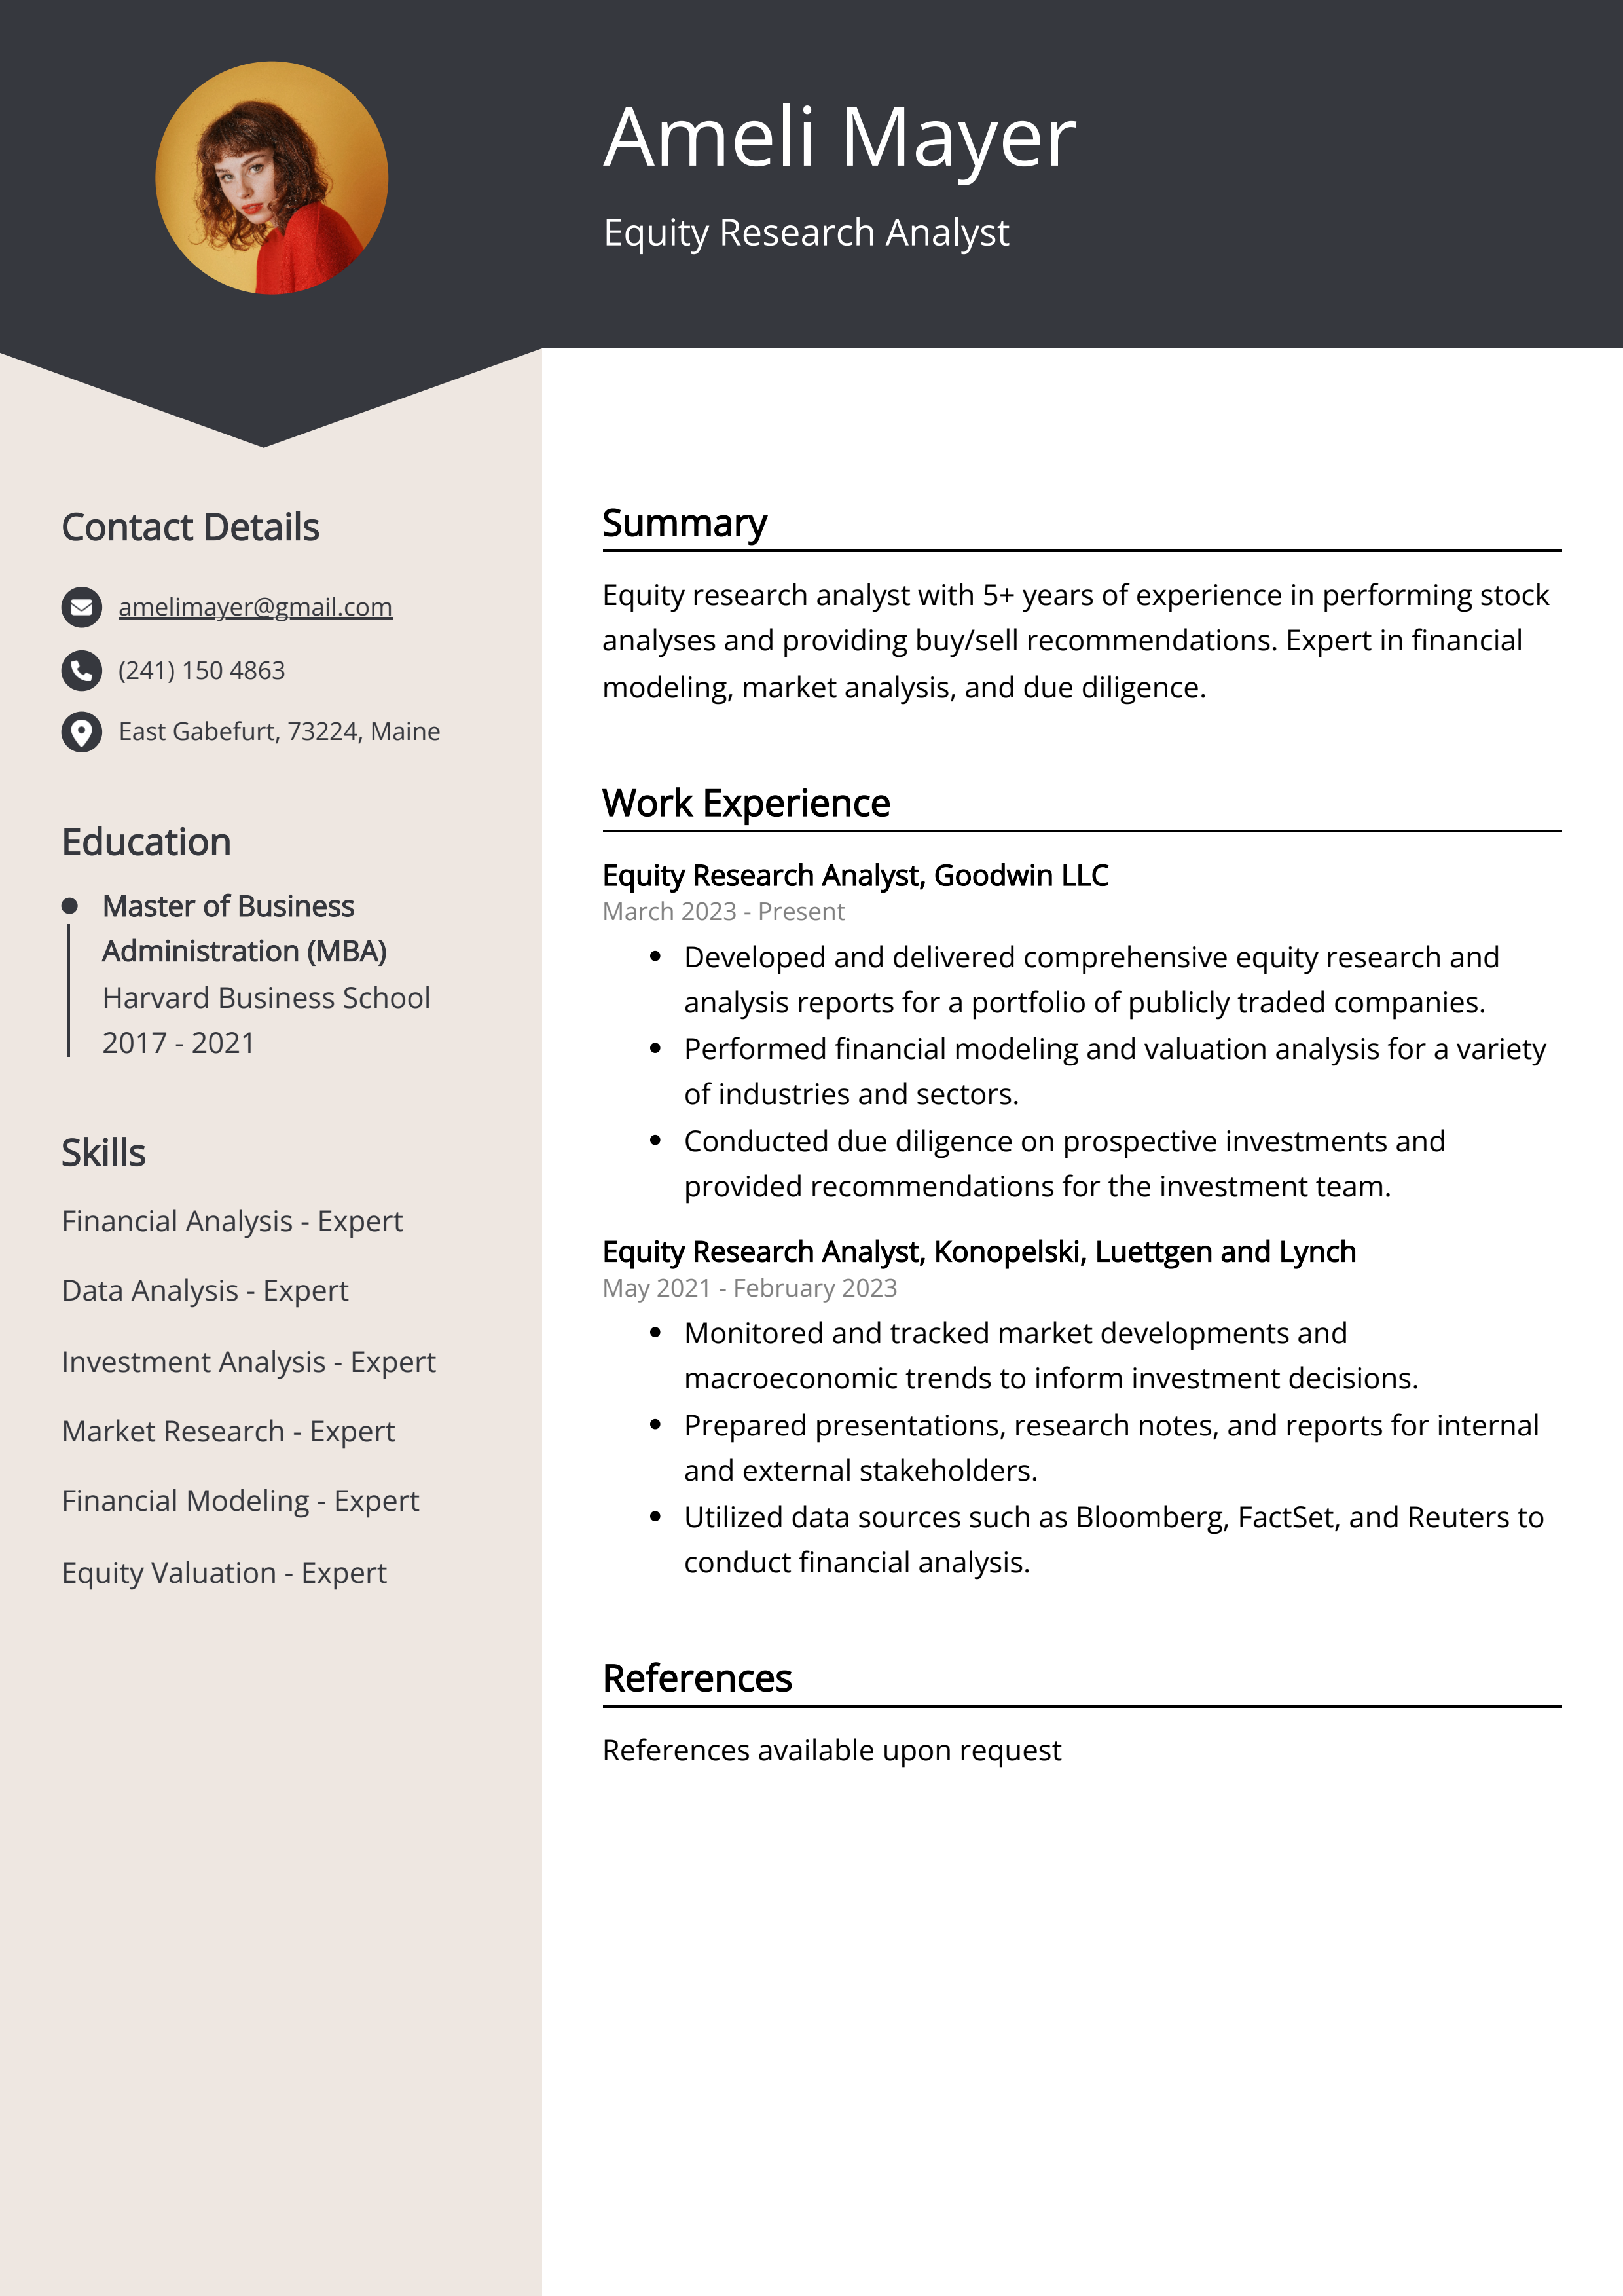 Equity Research Analyst CV Example